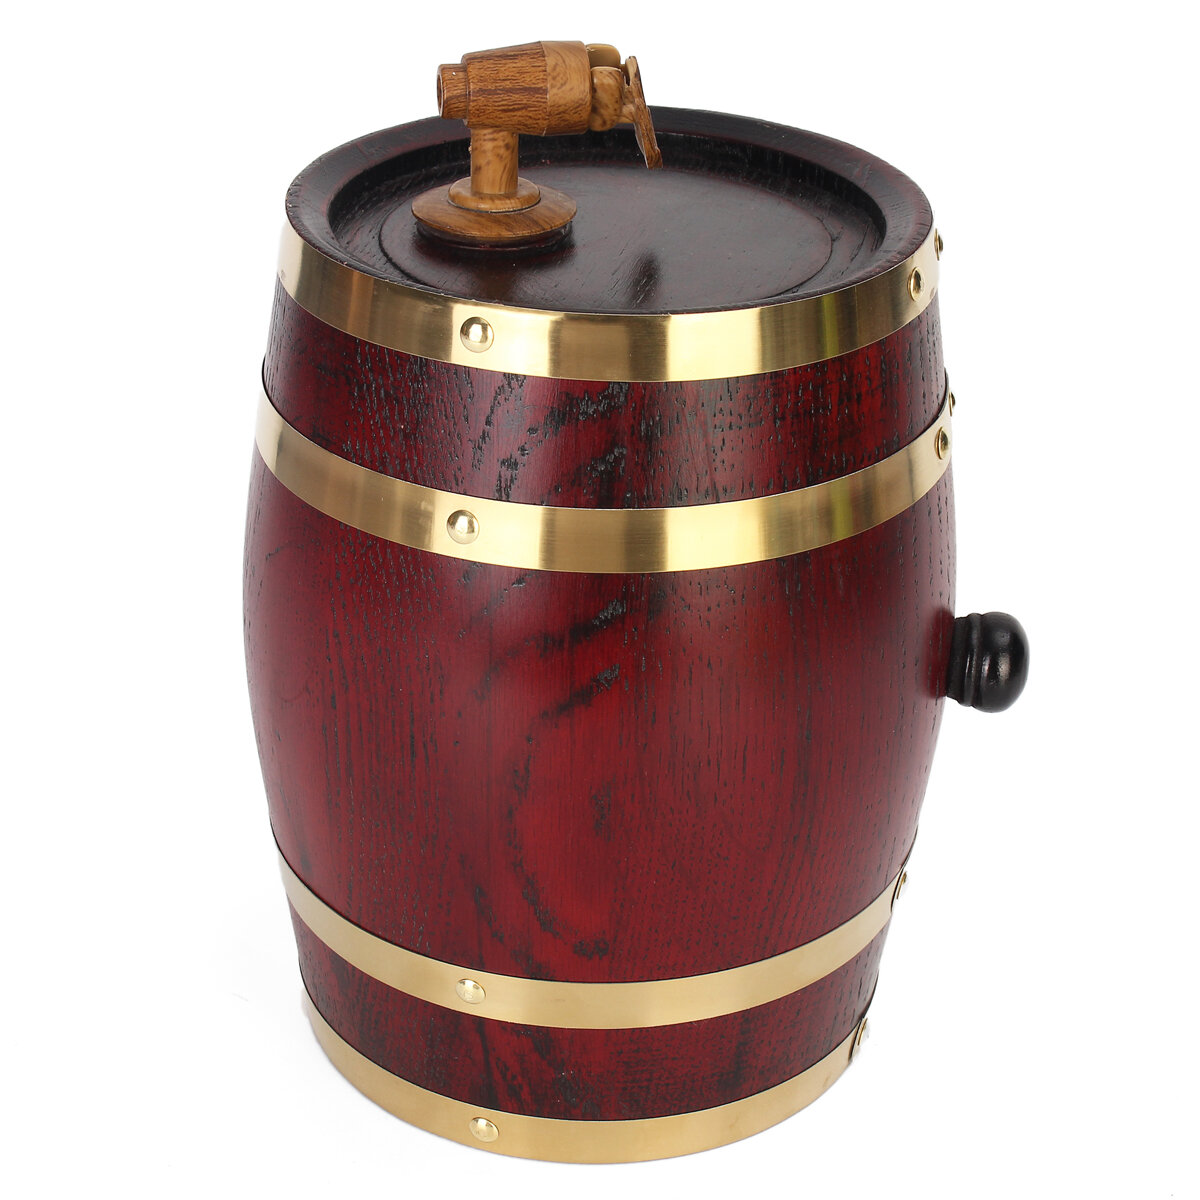 Image of Weikeduo Vtc-808 Wooden Alcohol Barrel 15L/3L/5L Rum Brewing Container Phnom Penh Decoration-Red Oak